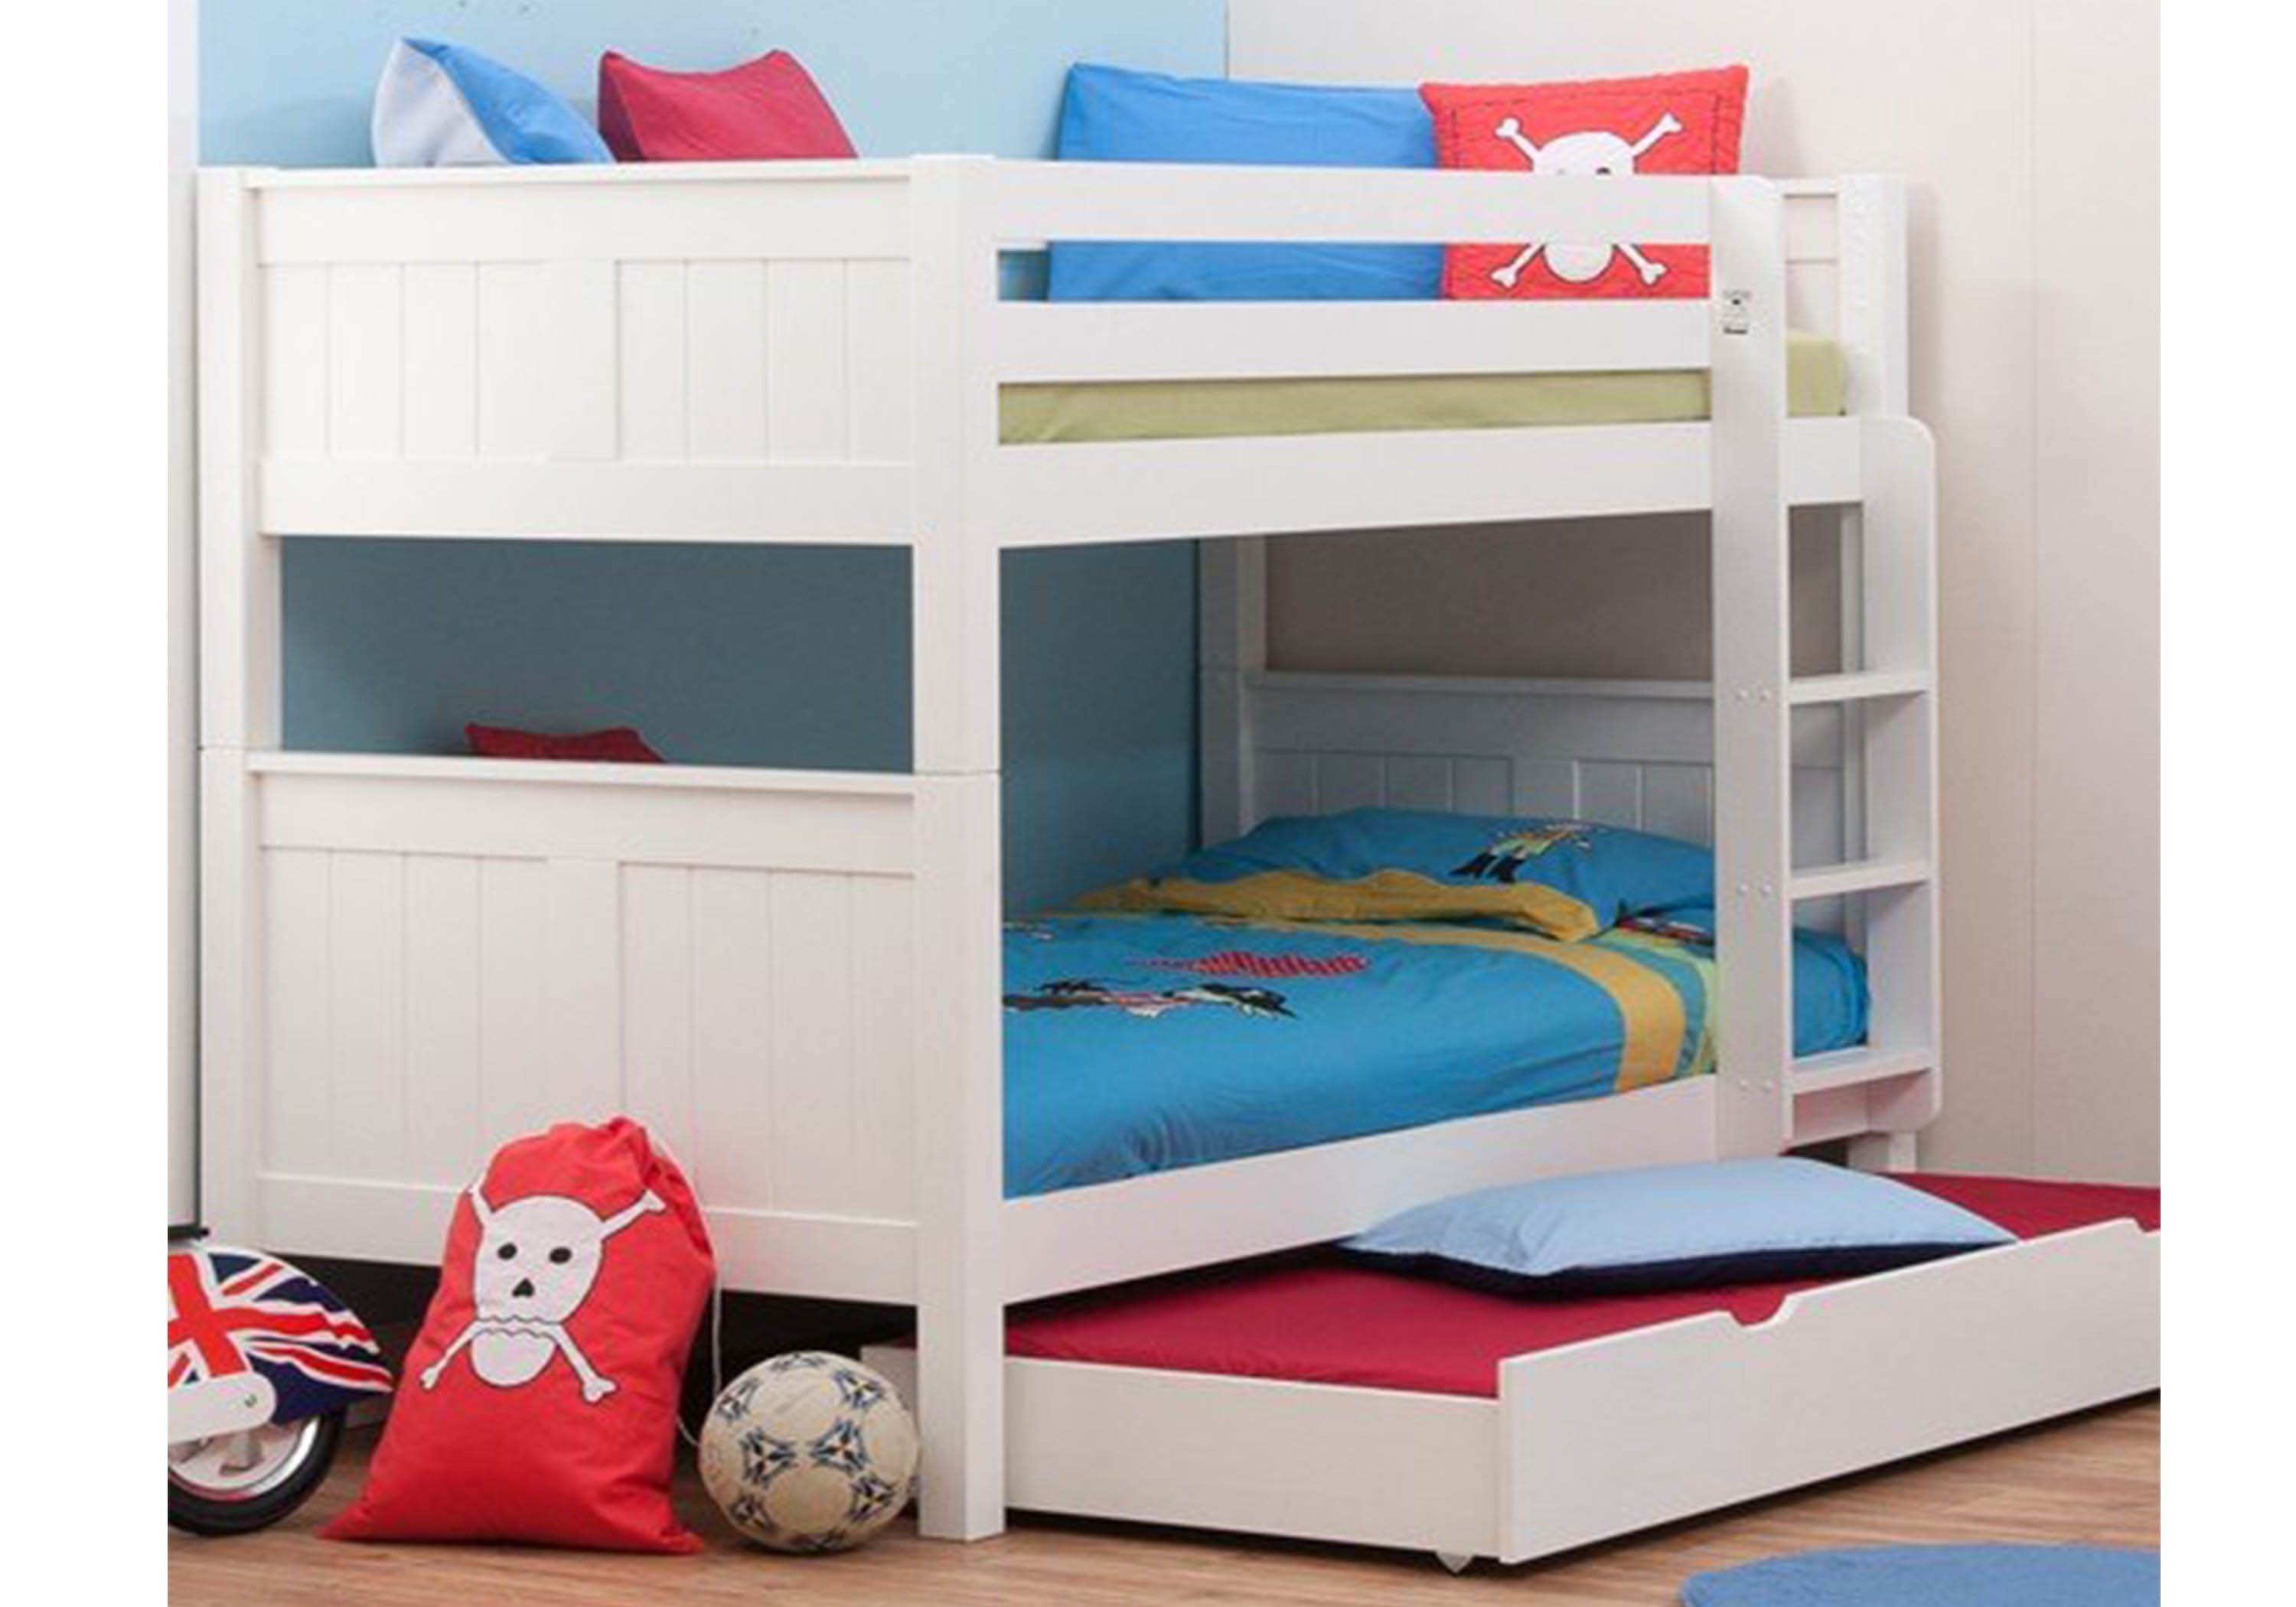 Stompa Classic Kids White Bunk Bed, White Bunk Beds